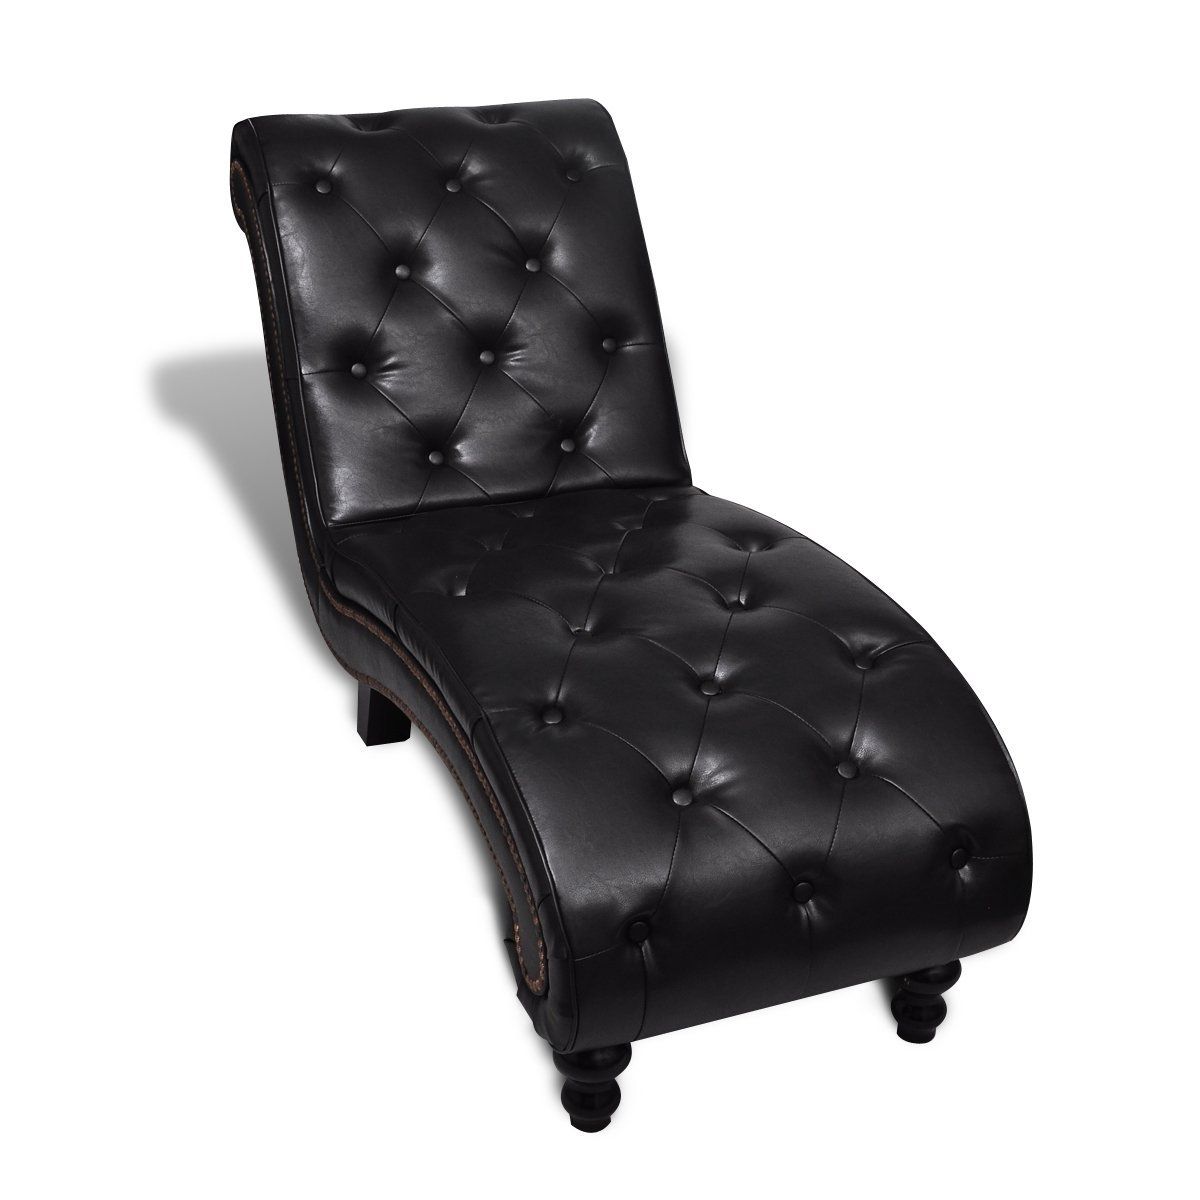 Black Tufted Faux Leather Chaise Lounge Chair For Bedroom For Widely Used Black Leather Chaises (View 10 of 15)